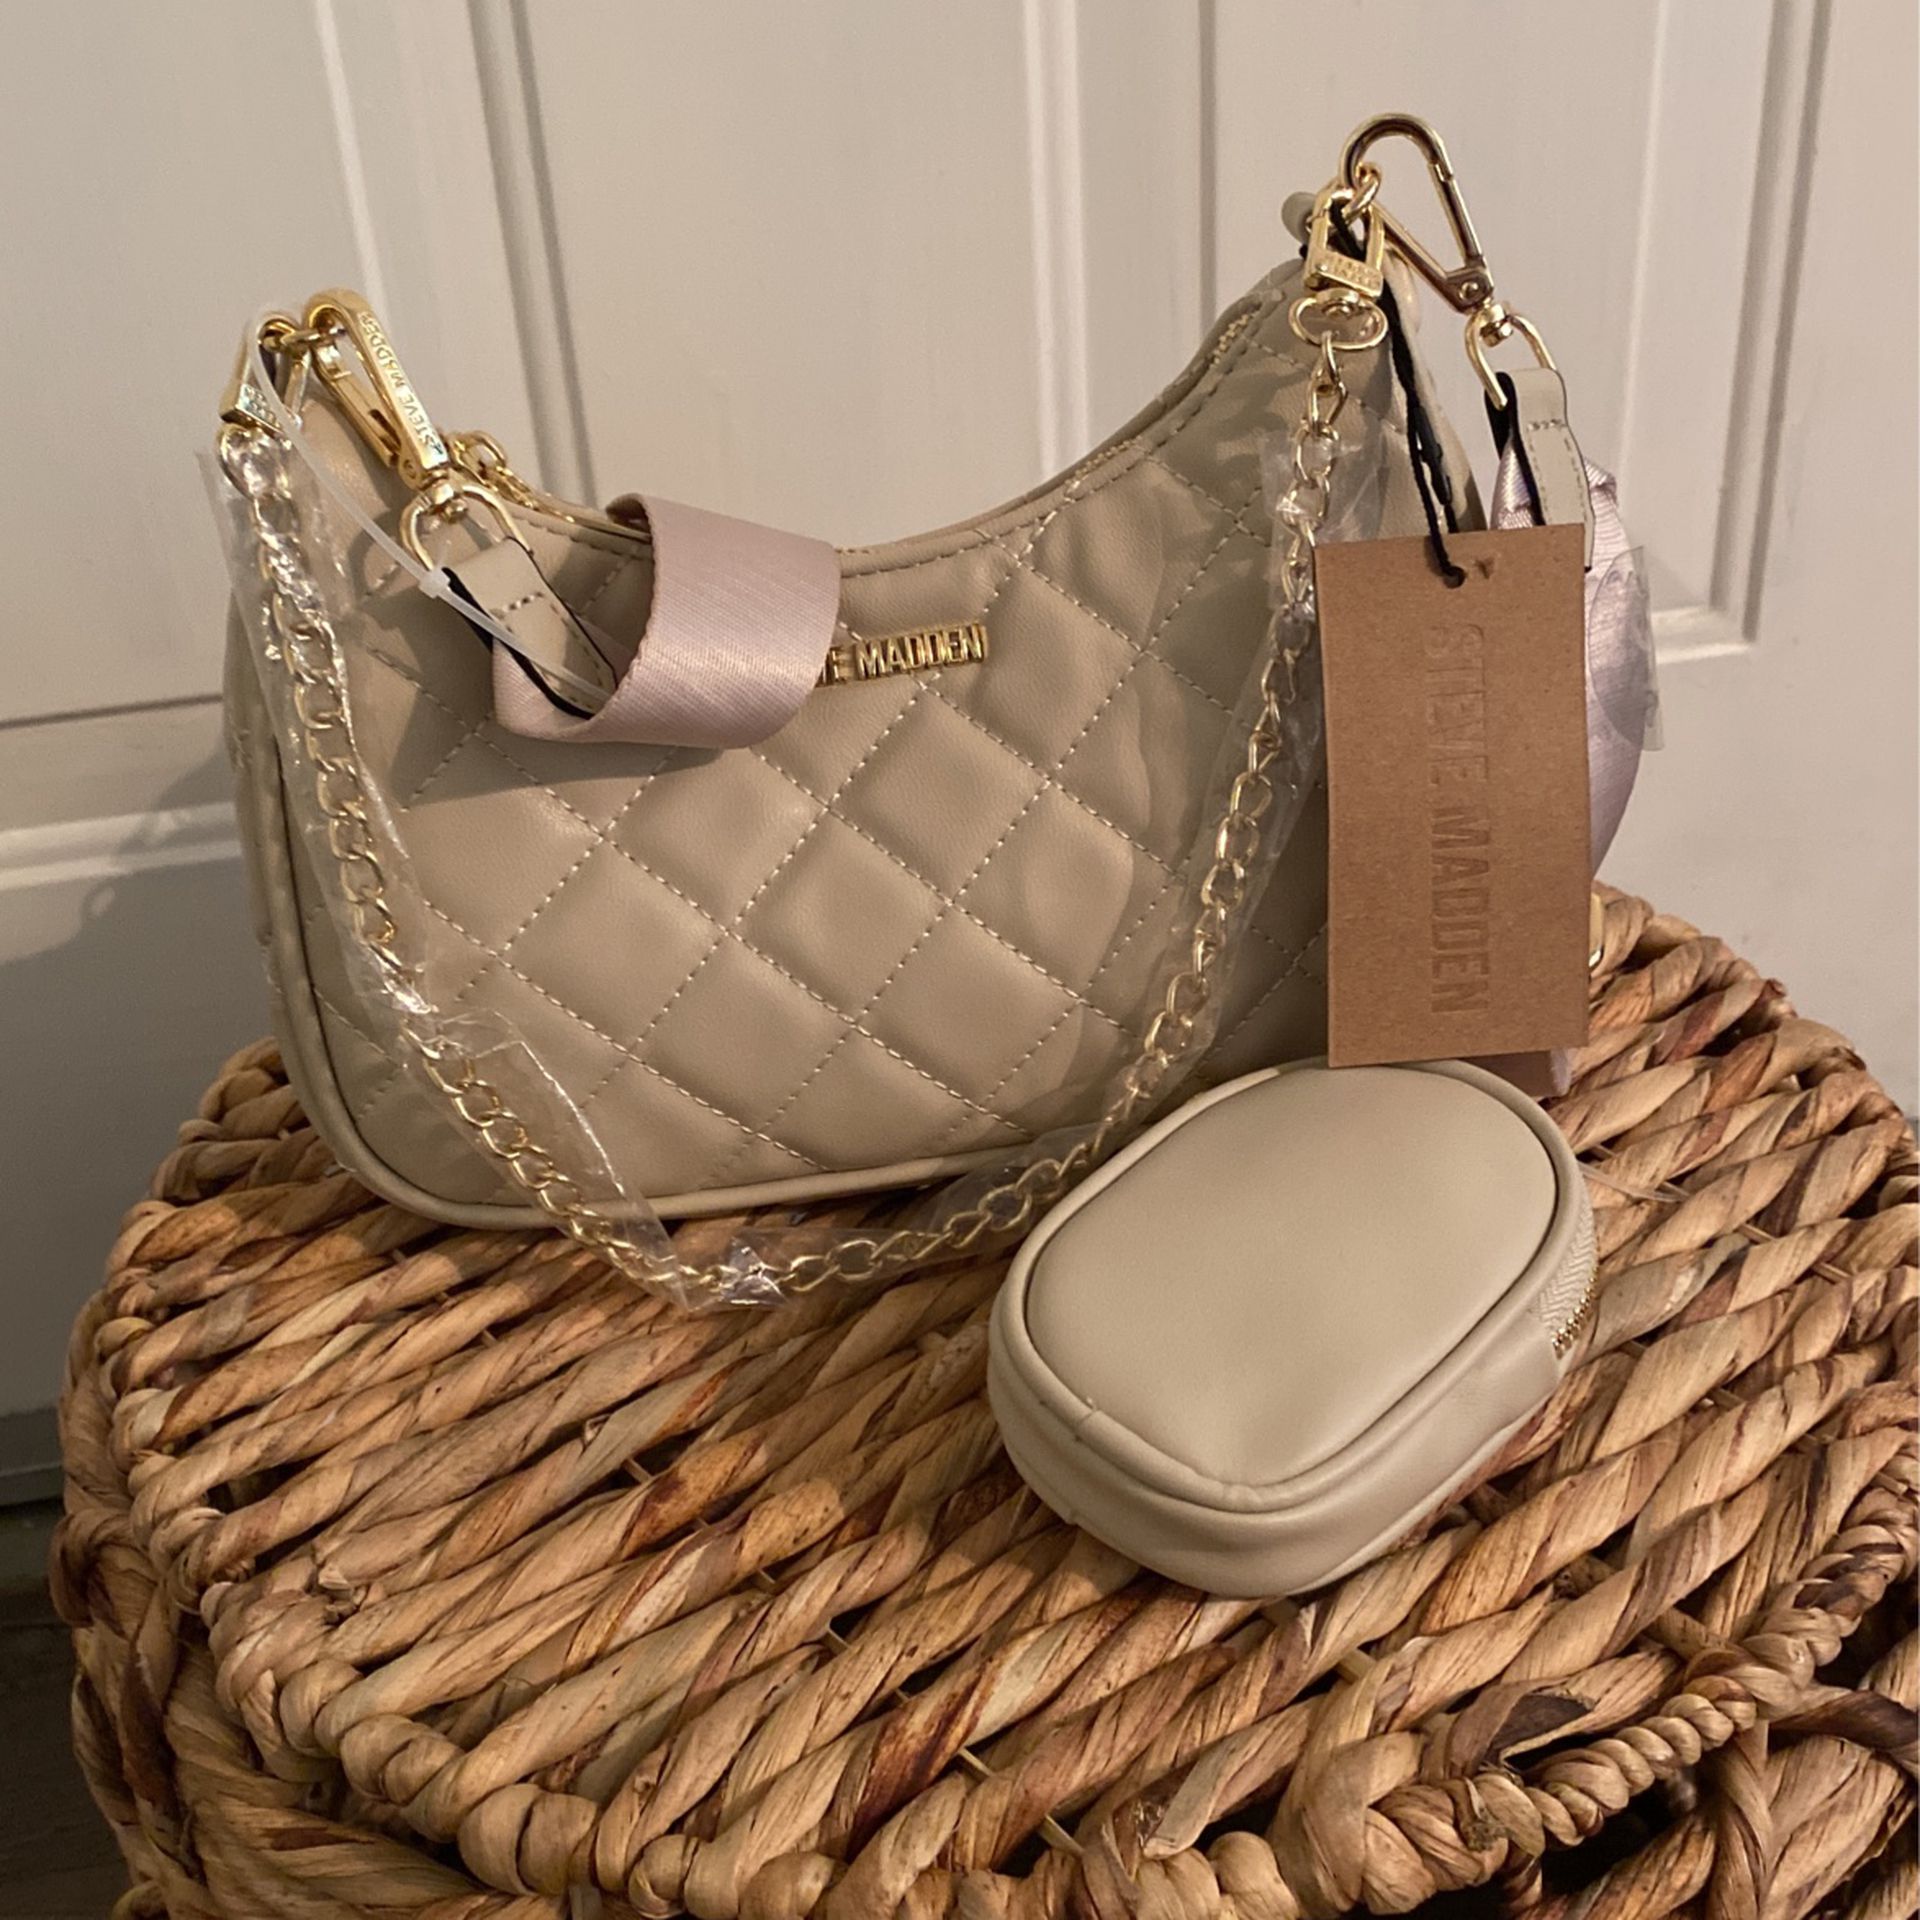 Large brown Steve Madden purse with small wallet for Sale in Holt, CA -  OfferUp